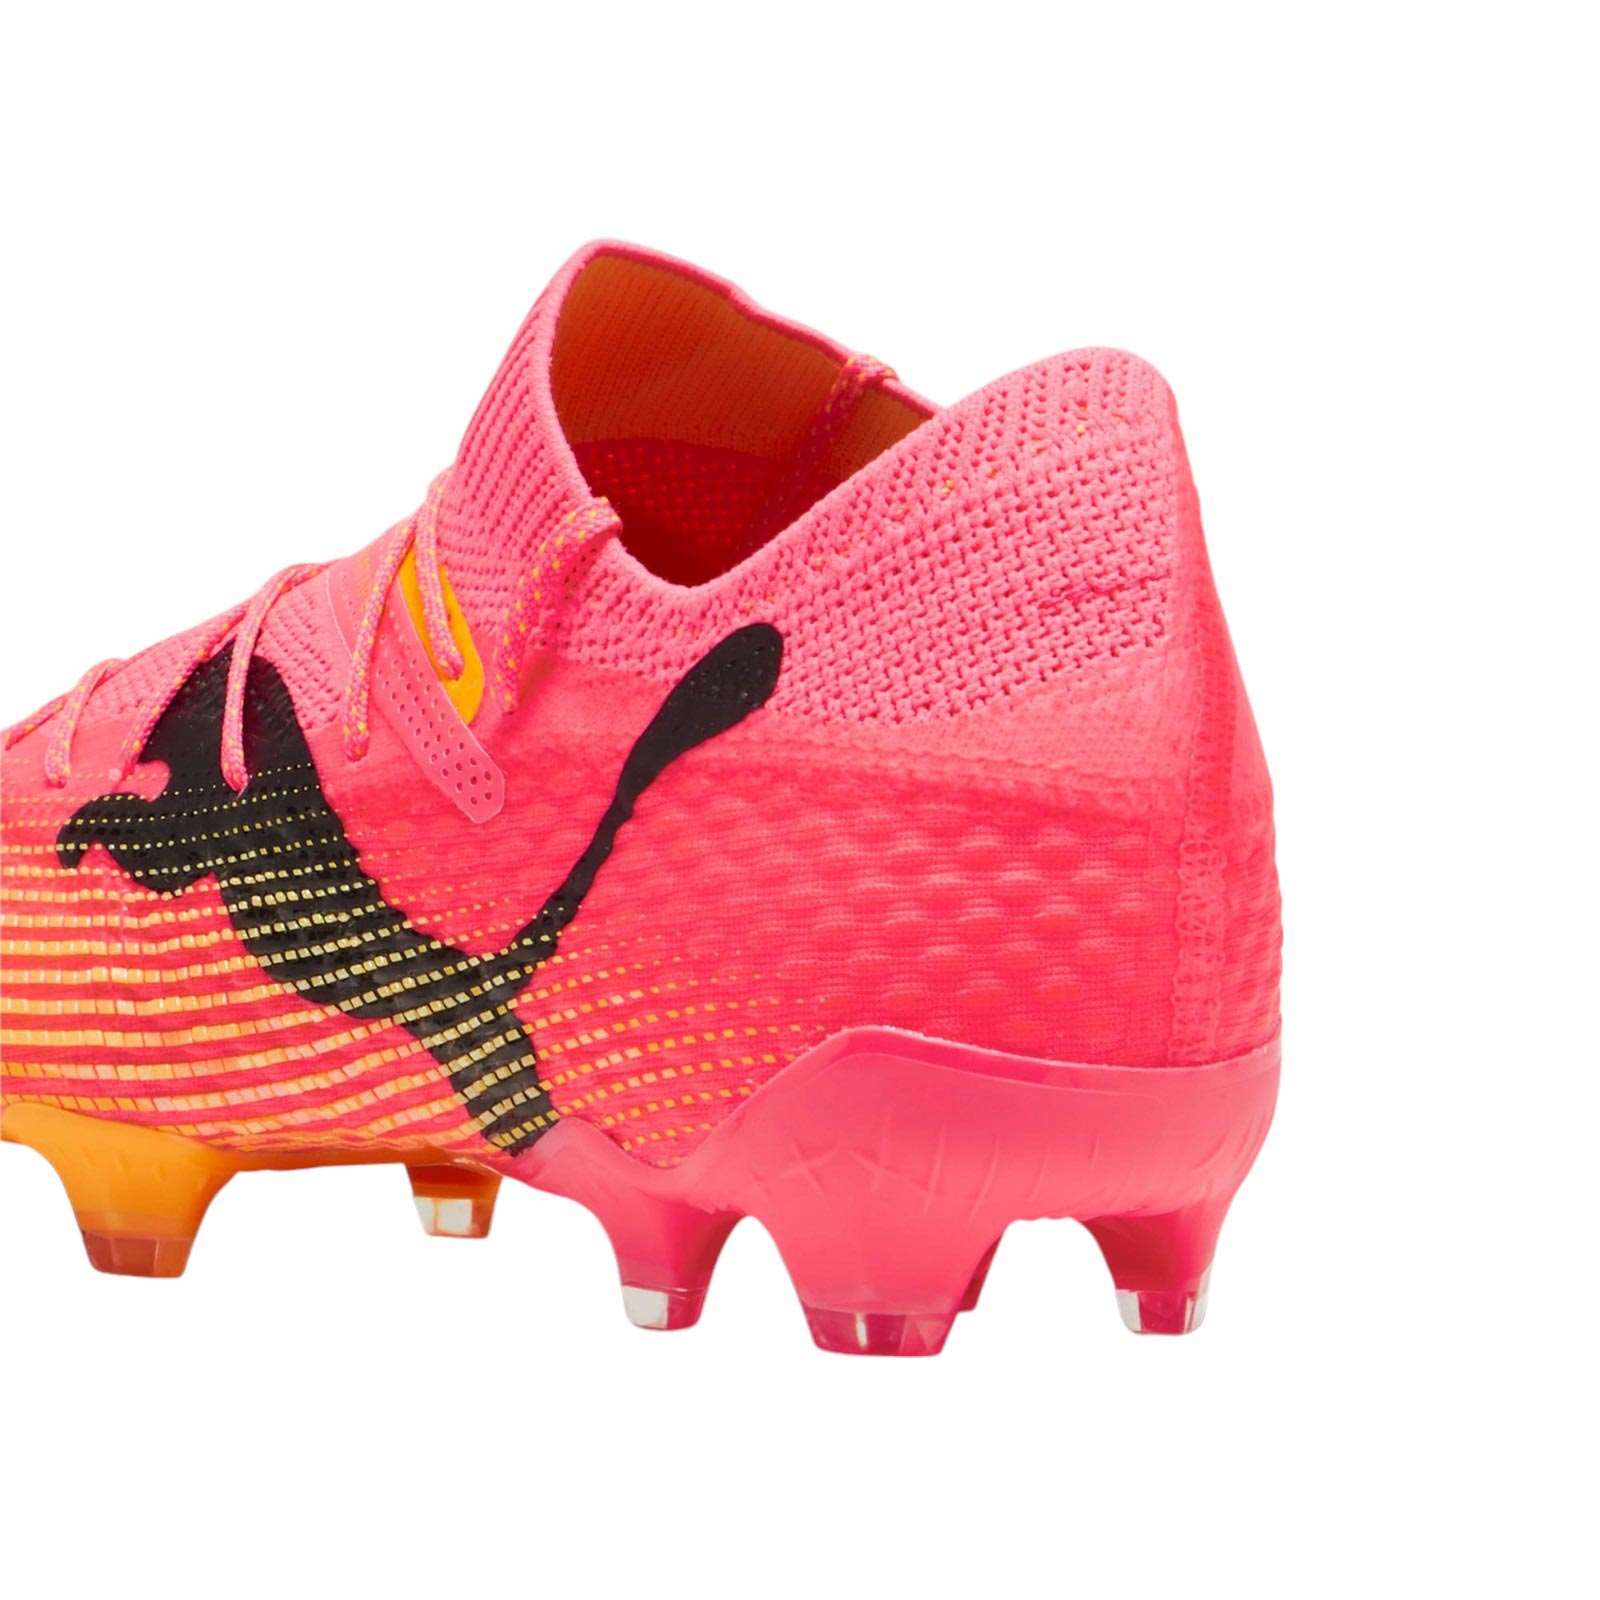 PUMA FUTURE 7 ULTIMATE WOMENS FIRM GROUND FOOTBALL BOOTS